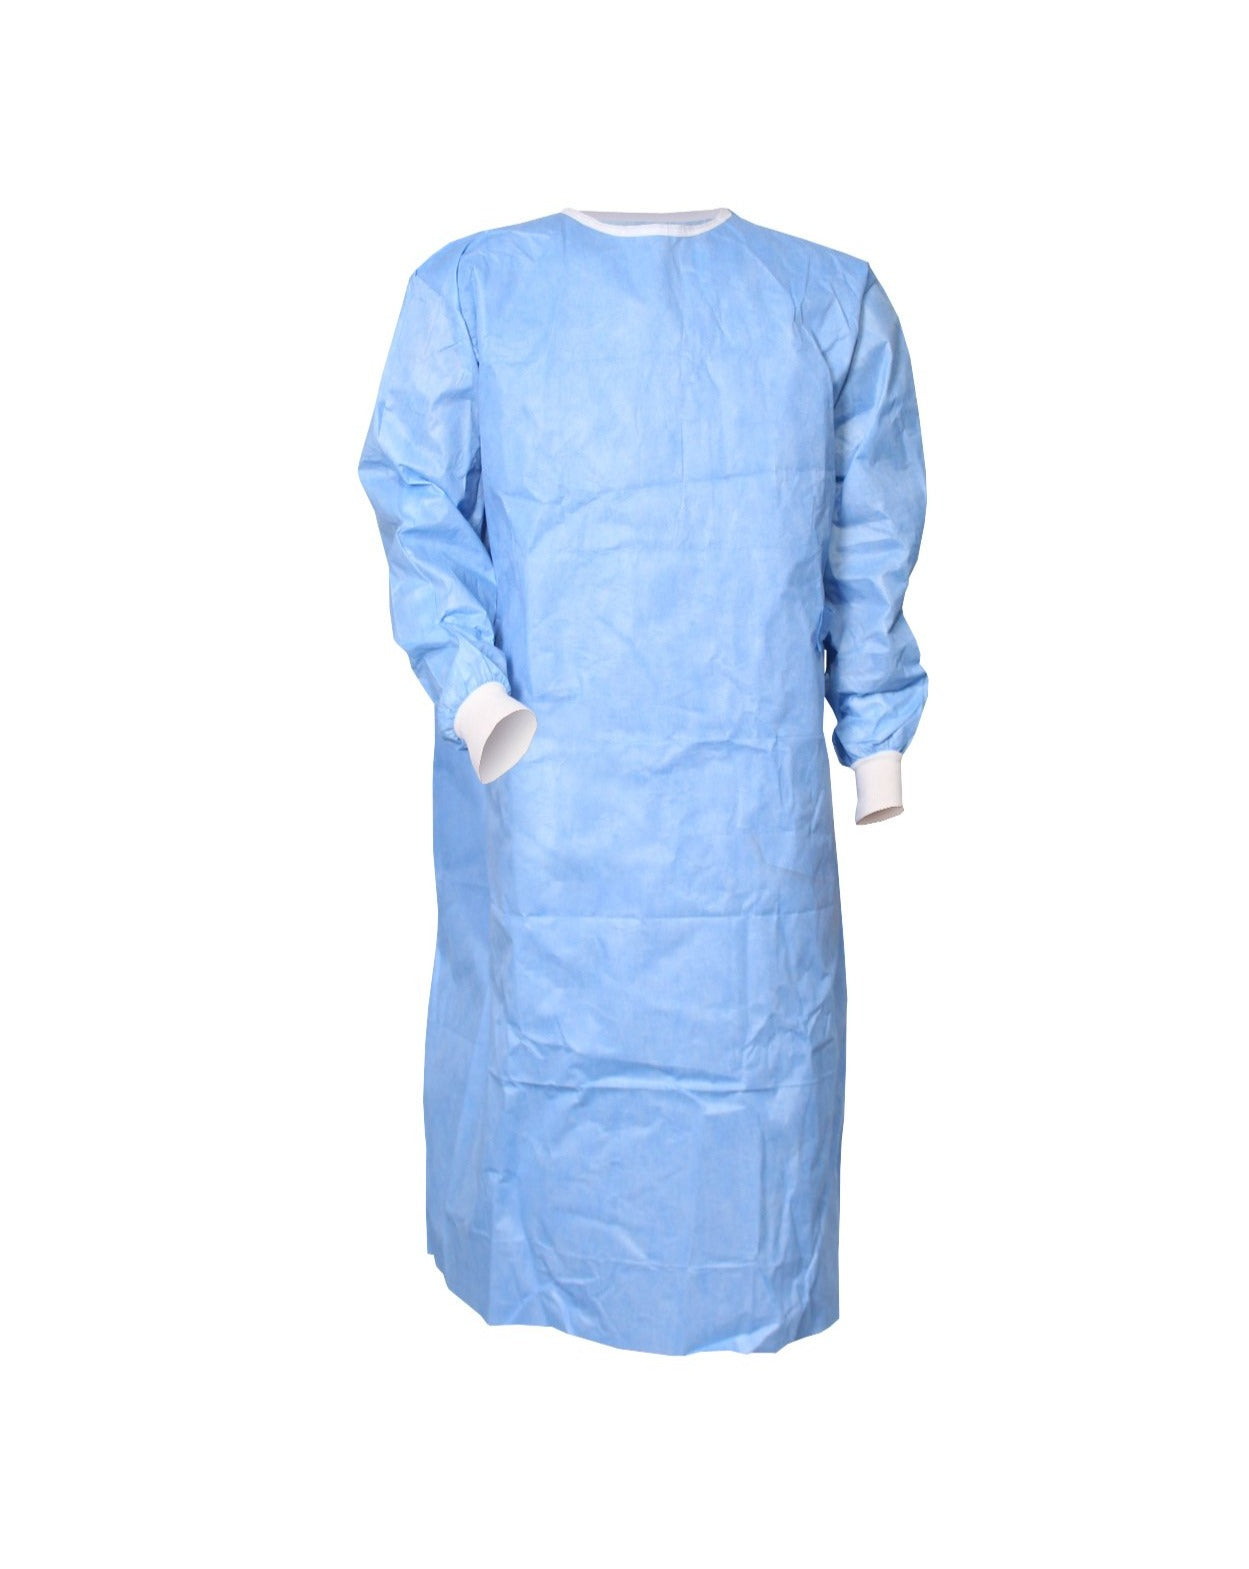 Non-Sterile Standard Surgical Gown